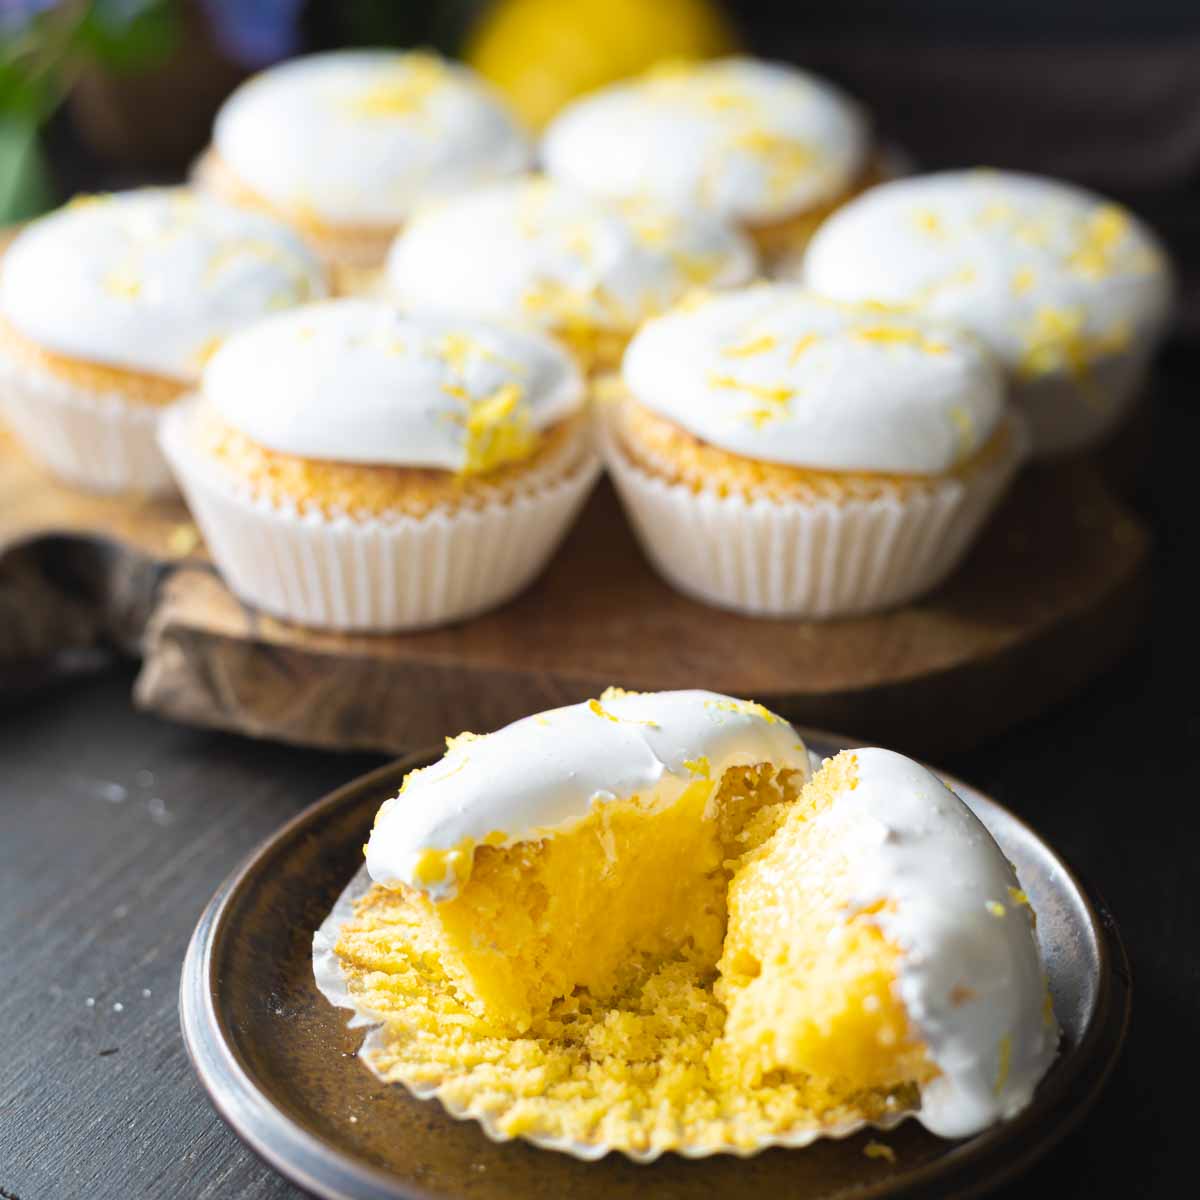 A Recipe for Cupcakes cut into half with filling.